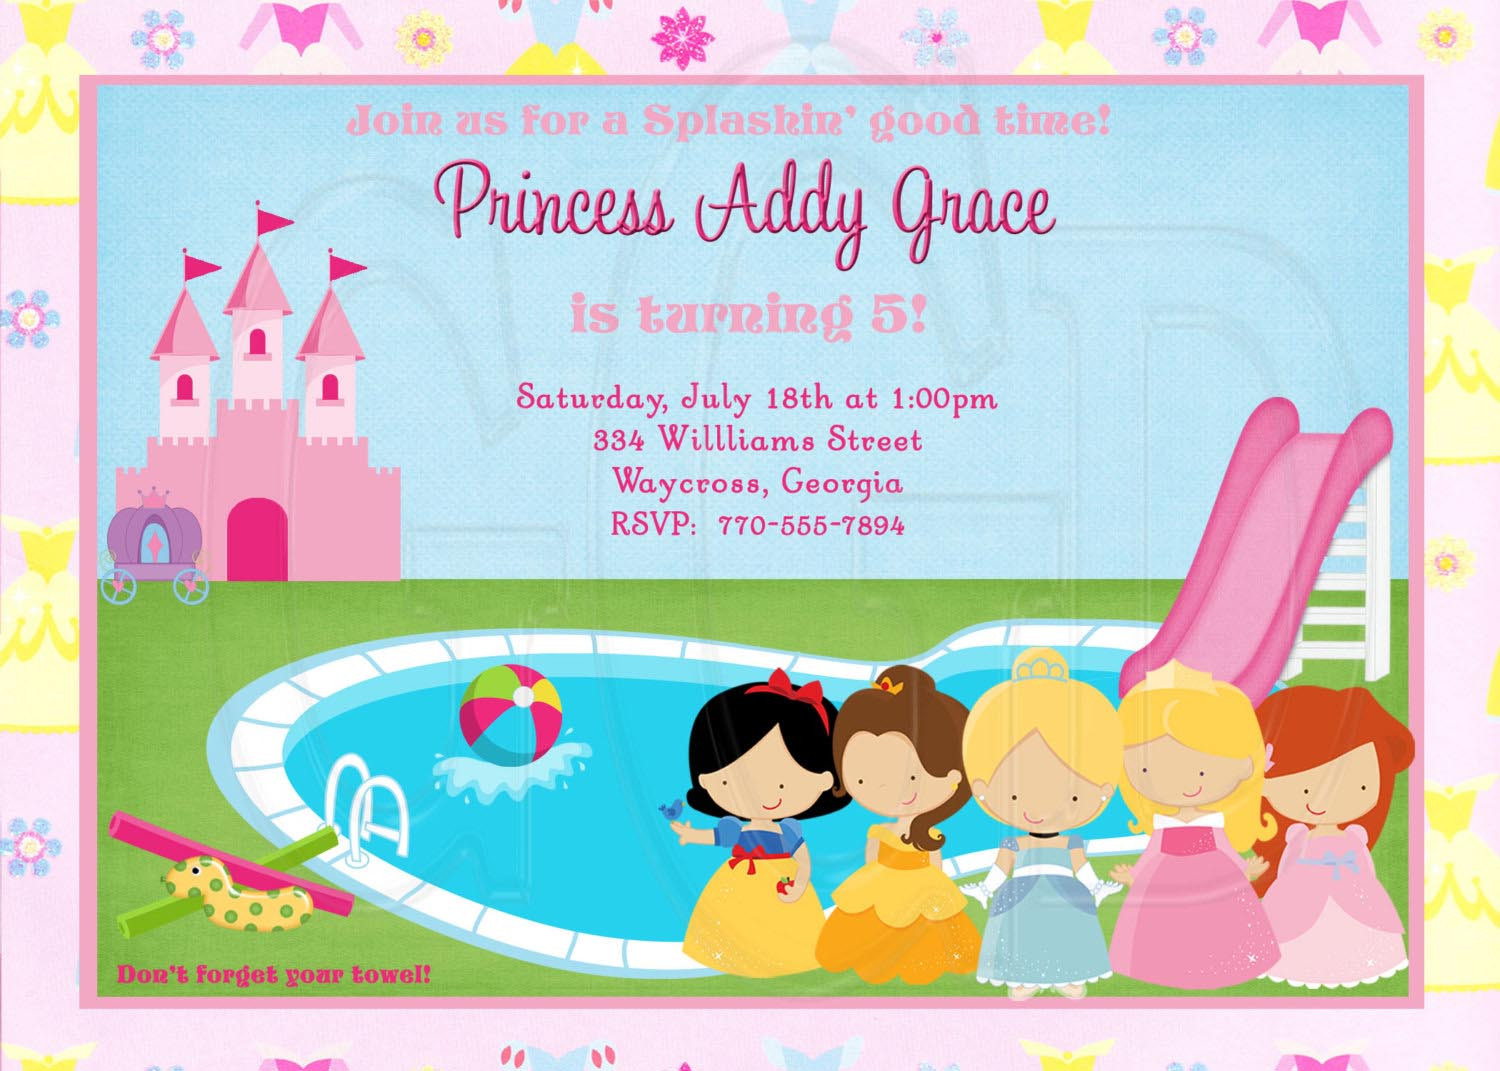 Princess Pool Party Ideas
 What are Princess Party Invitations Look Like